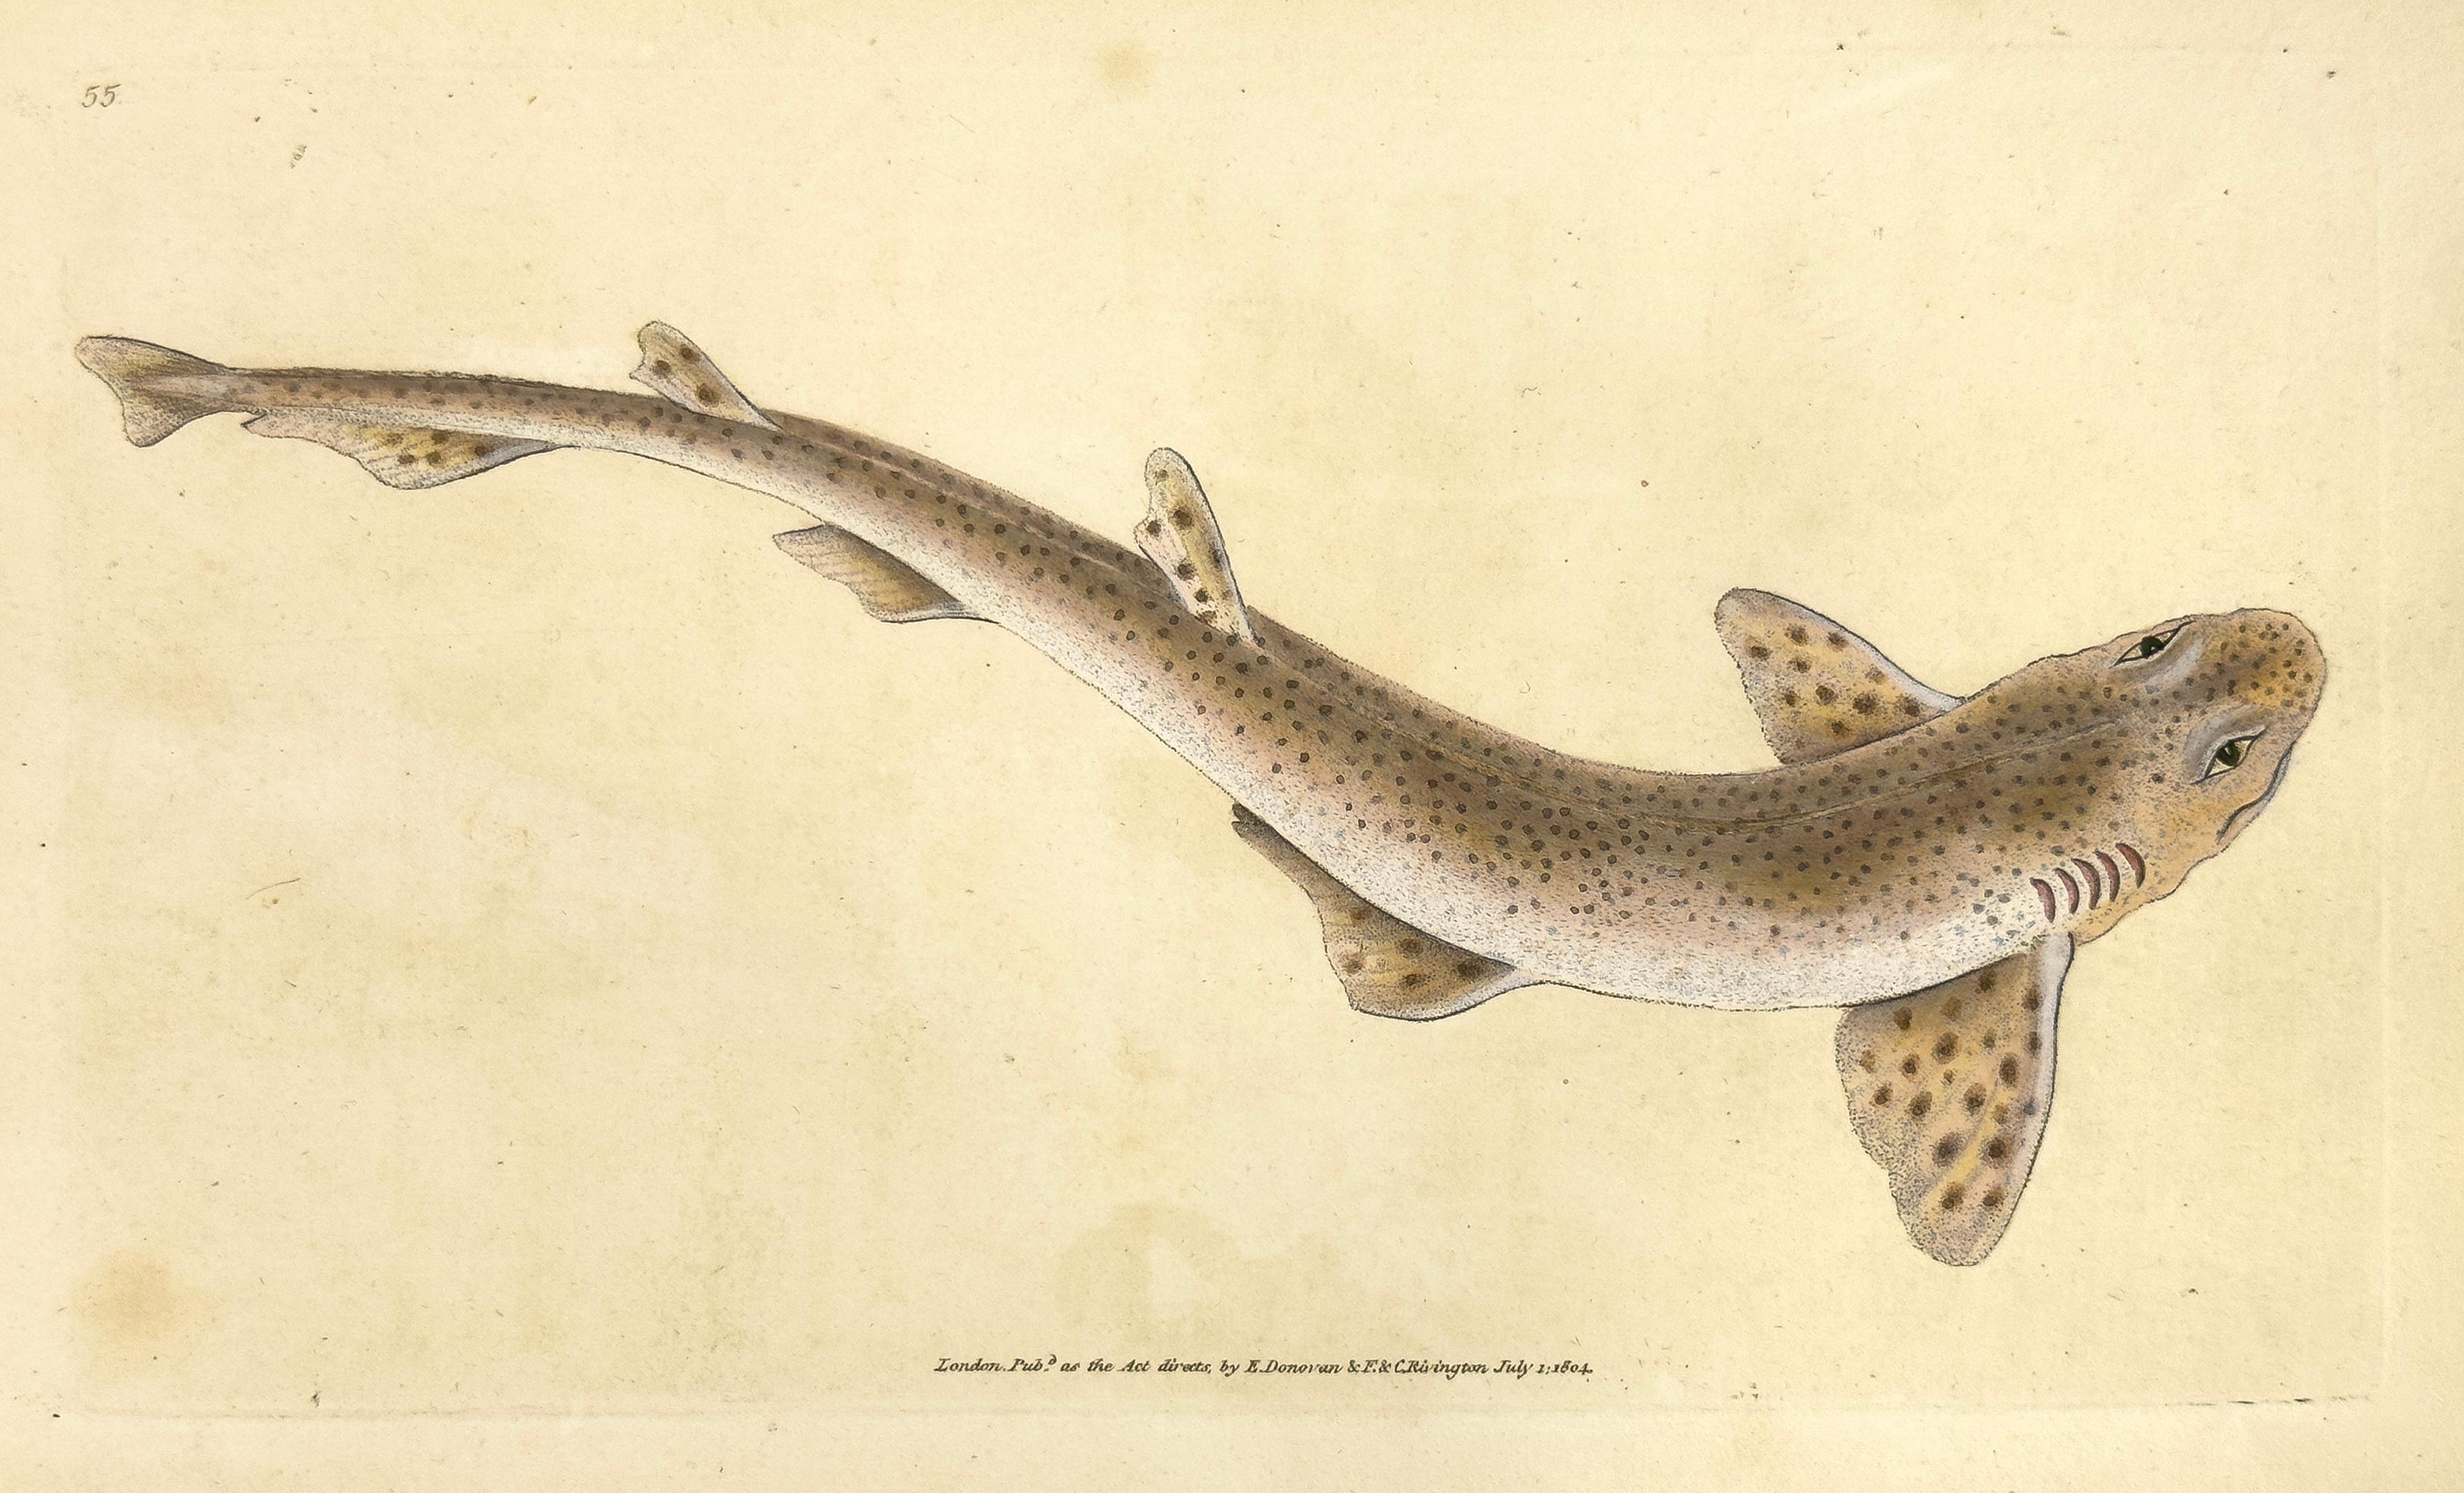 Edward Donovan Animal Print - 55: Squalus catulus, Lesser Spotted Shark